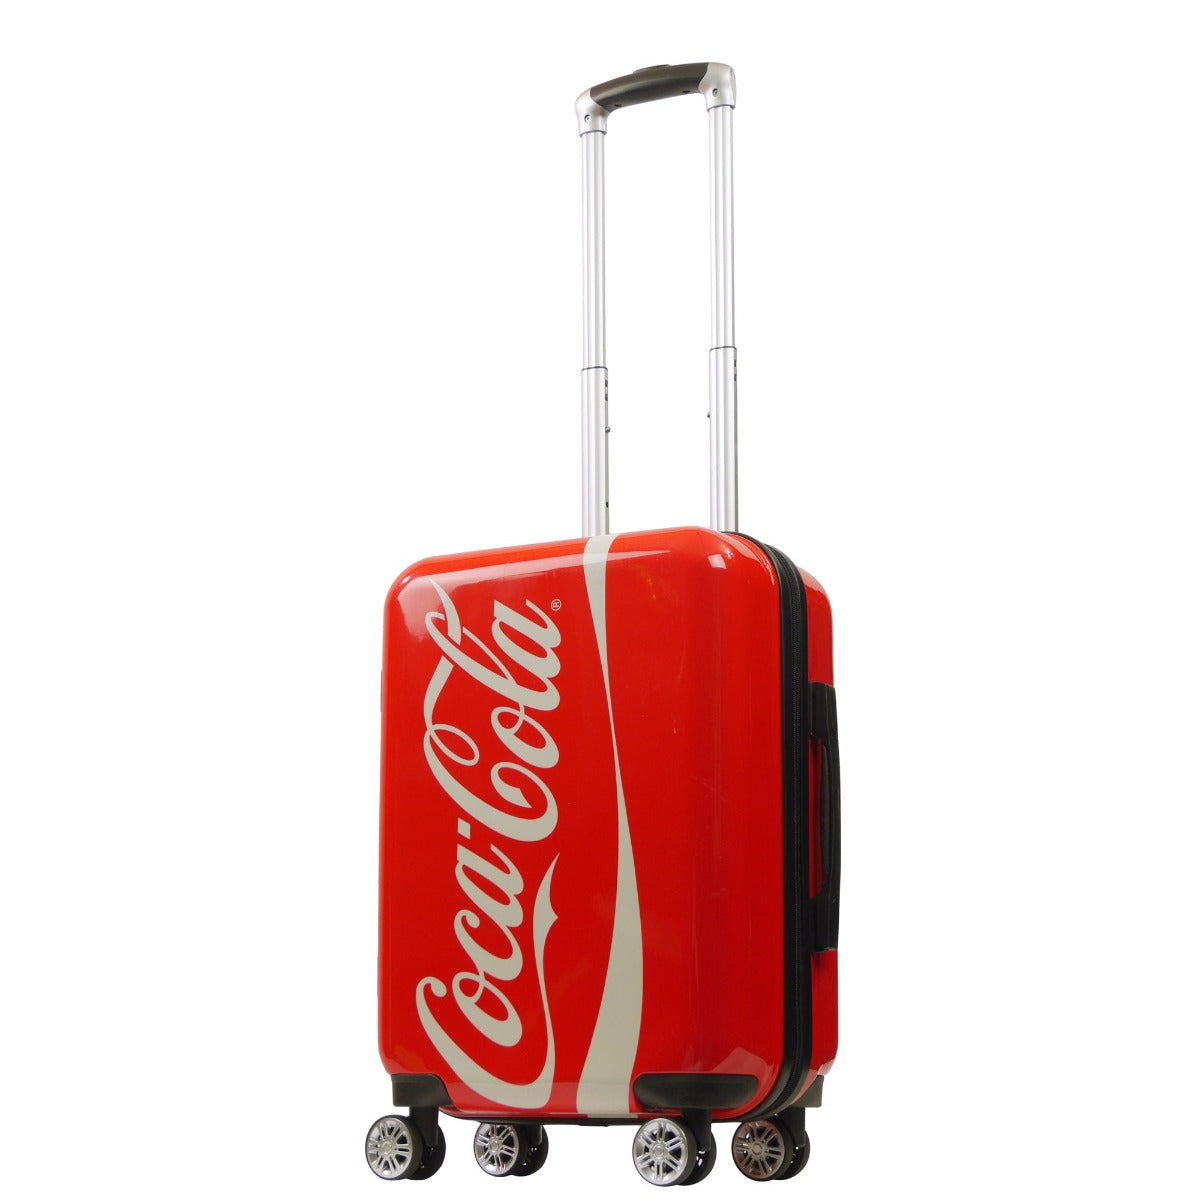 Ful Coca Cola 21" hardside spinner luggage suitcase - best carry on suitcases for travel